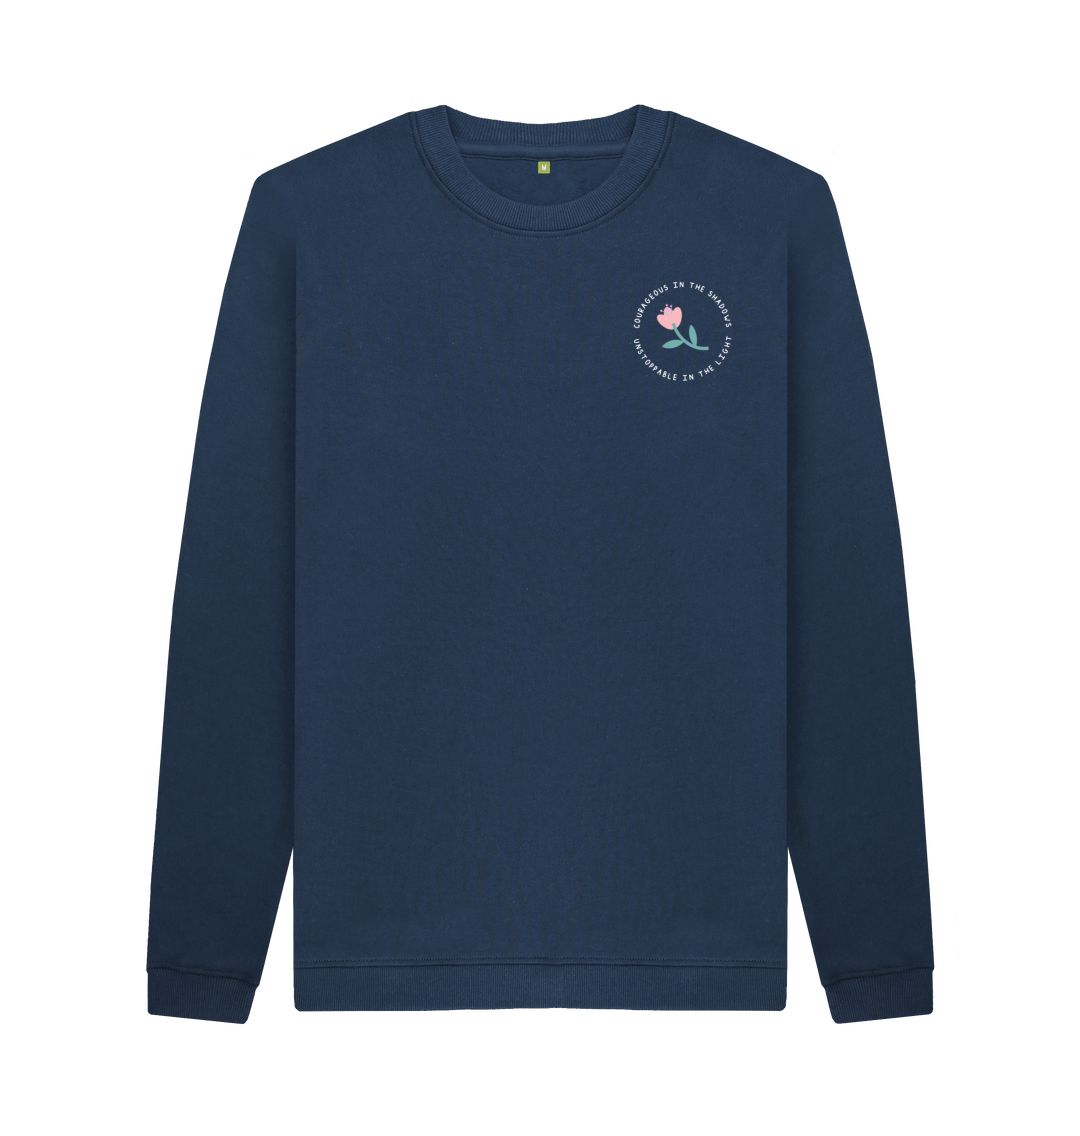 Navy Blue Courageous & Unstoppable Sweater - Dark